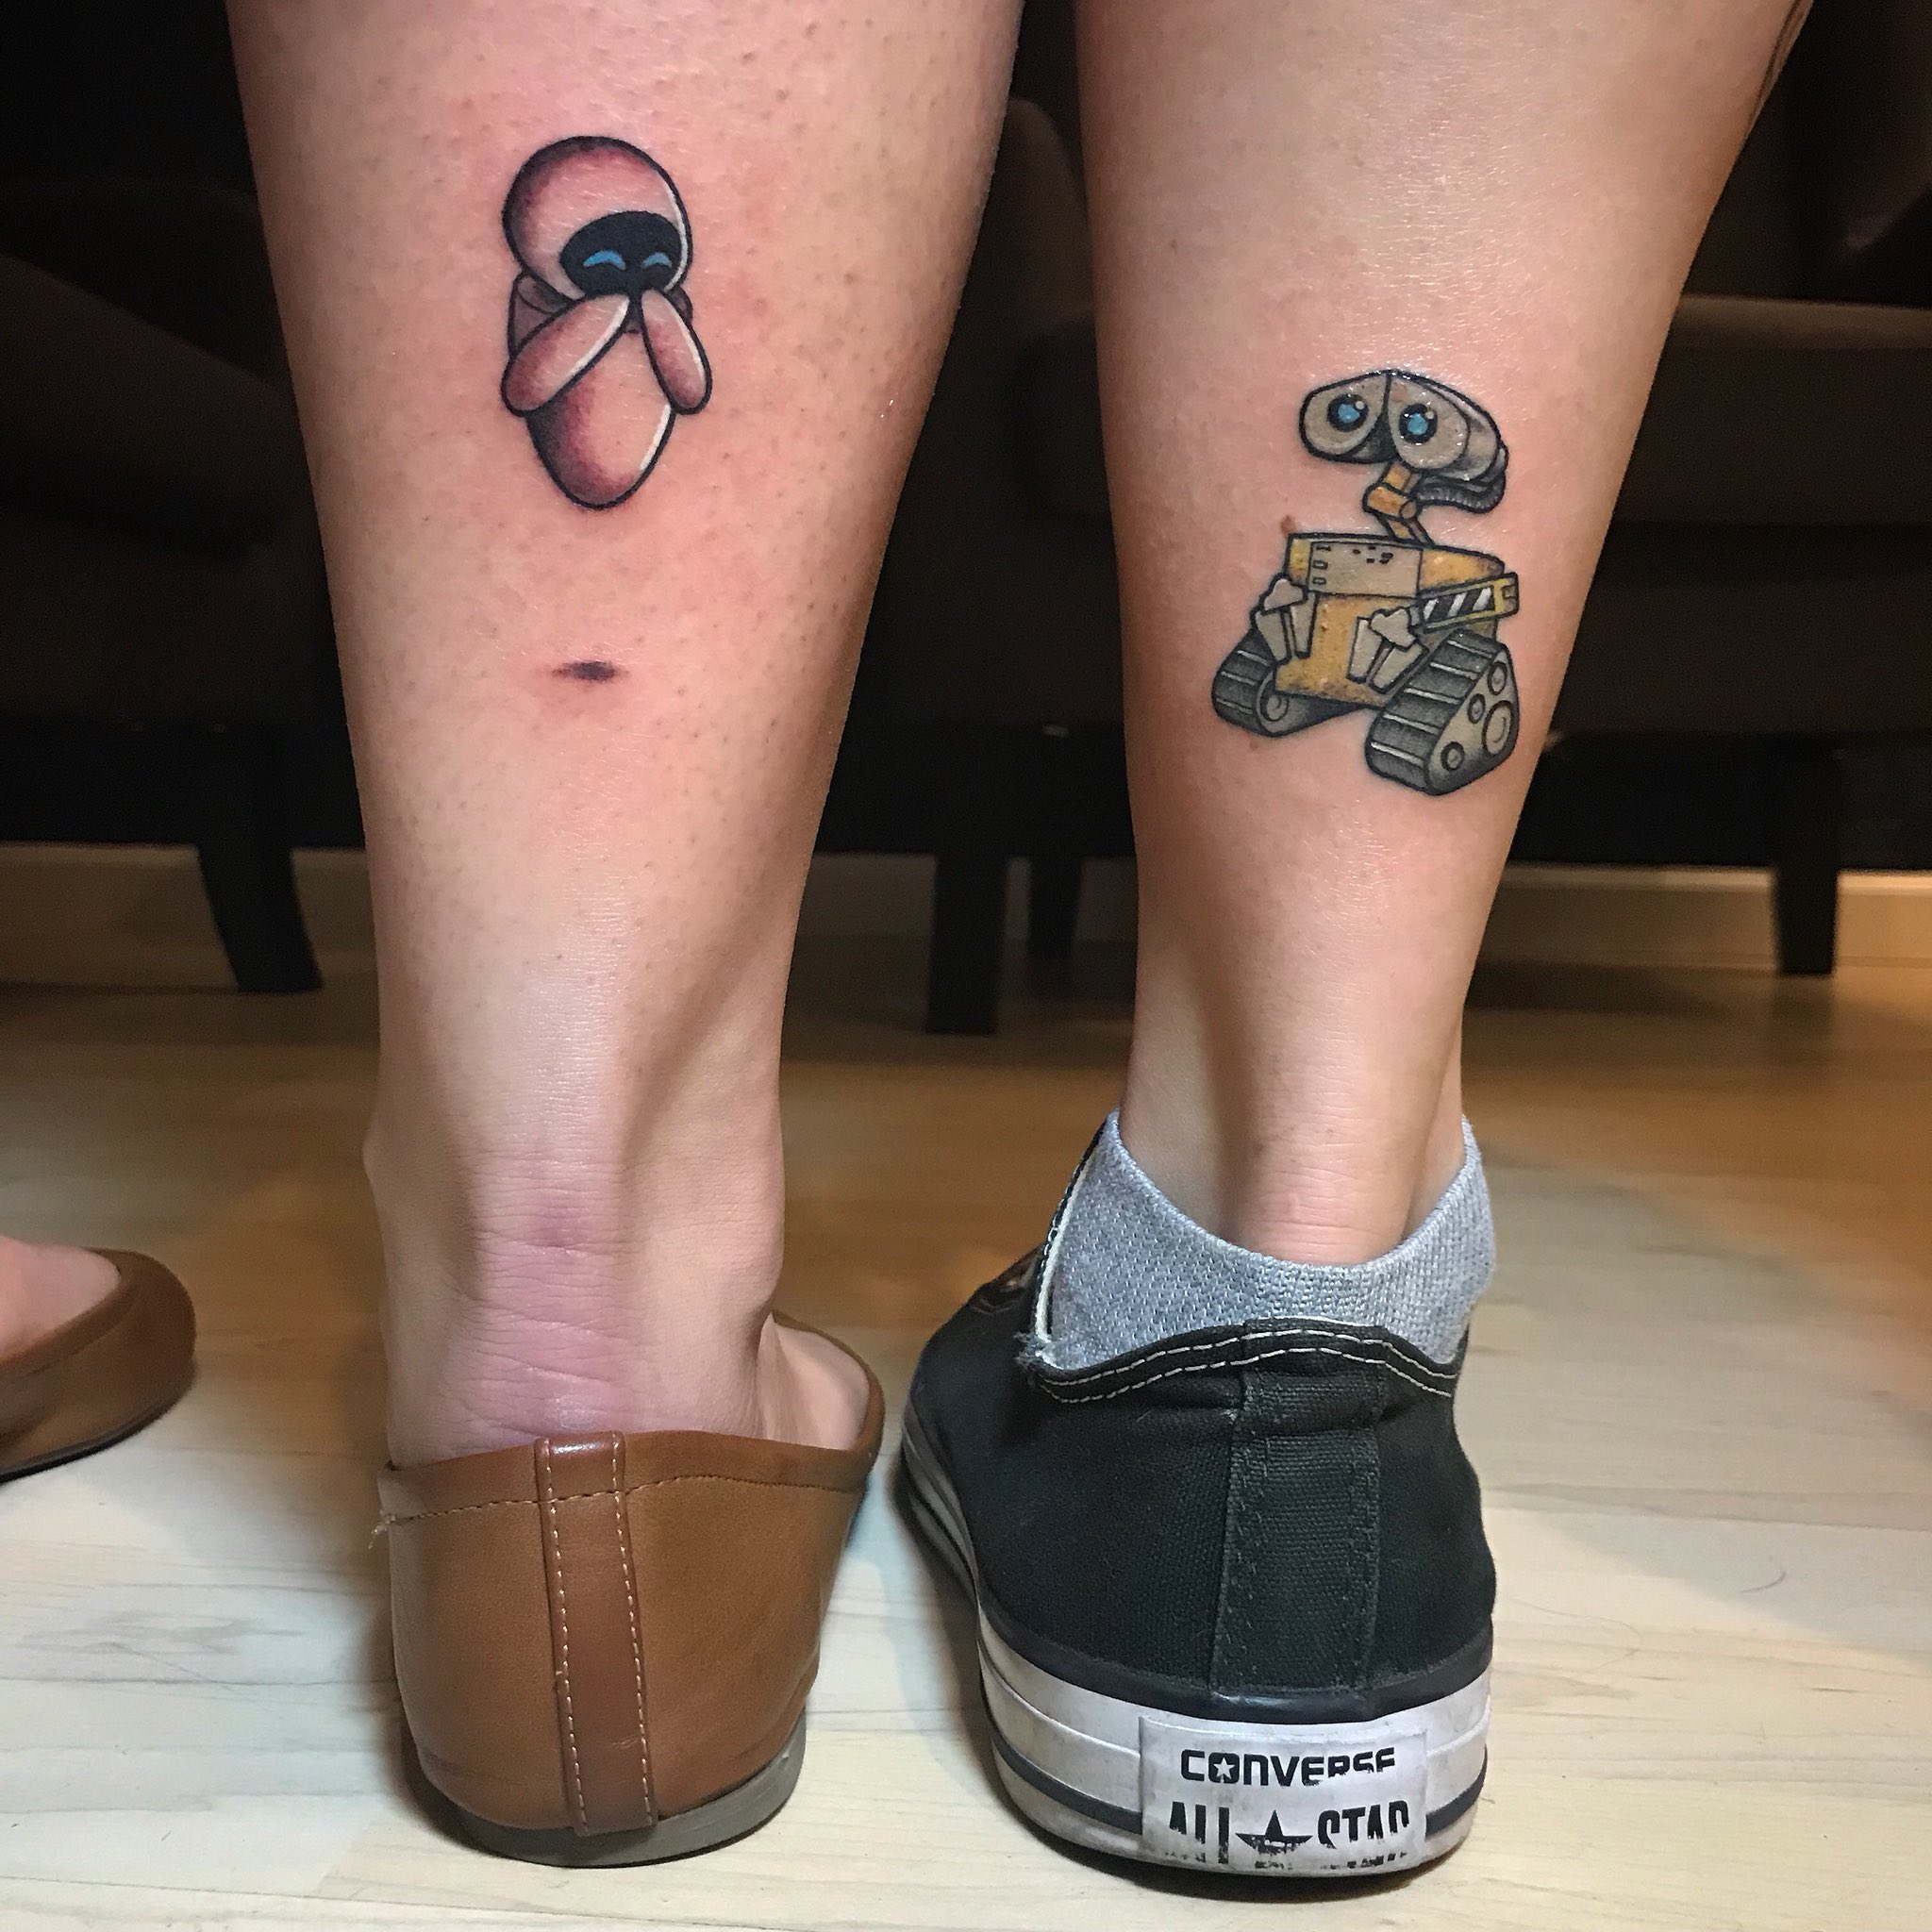 Walle and Eve tattoos on my feet  by caseychaosx instagra  Flickr